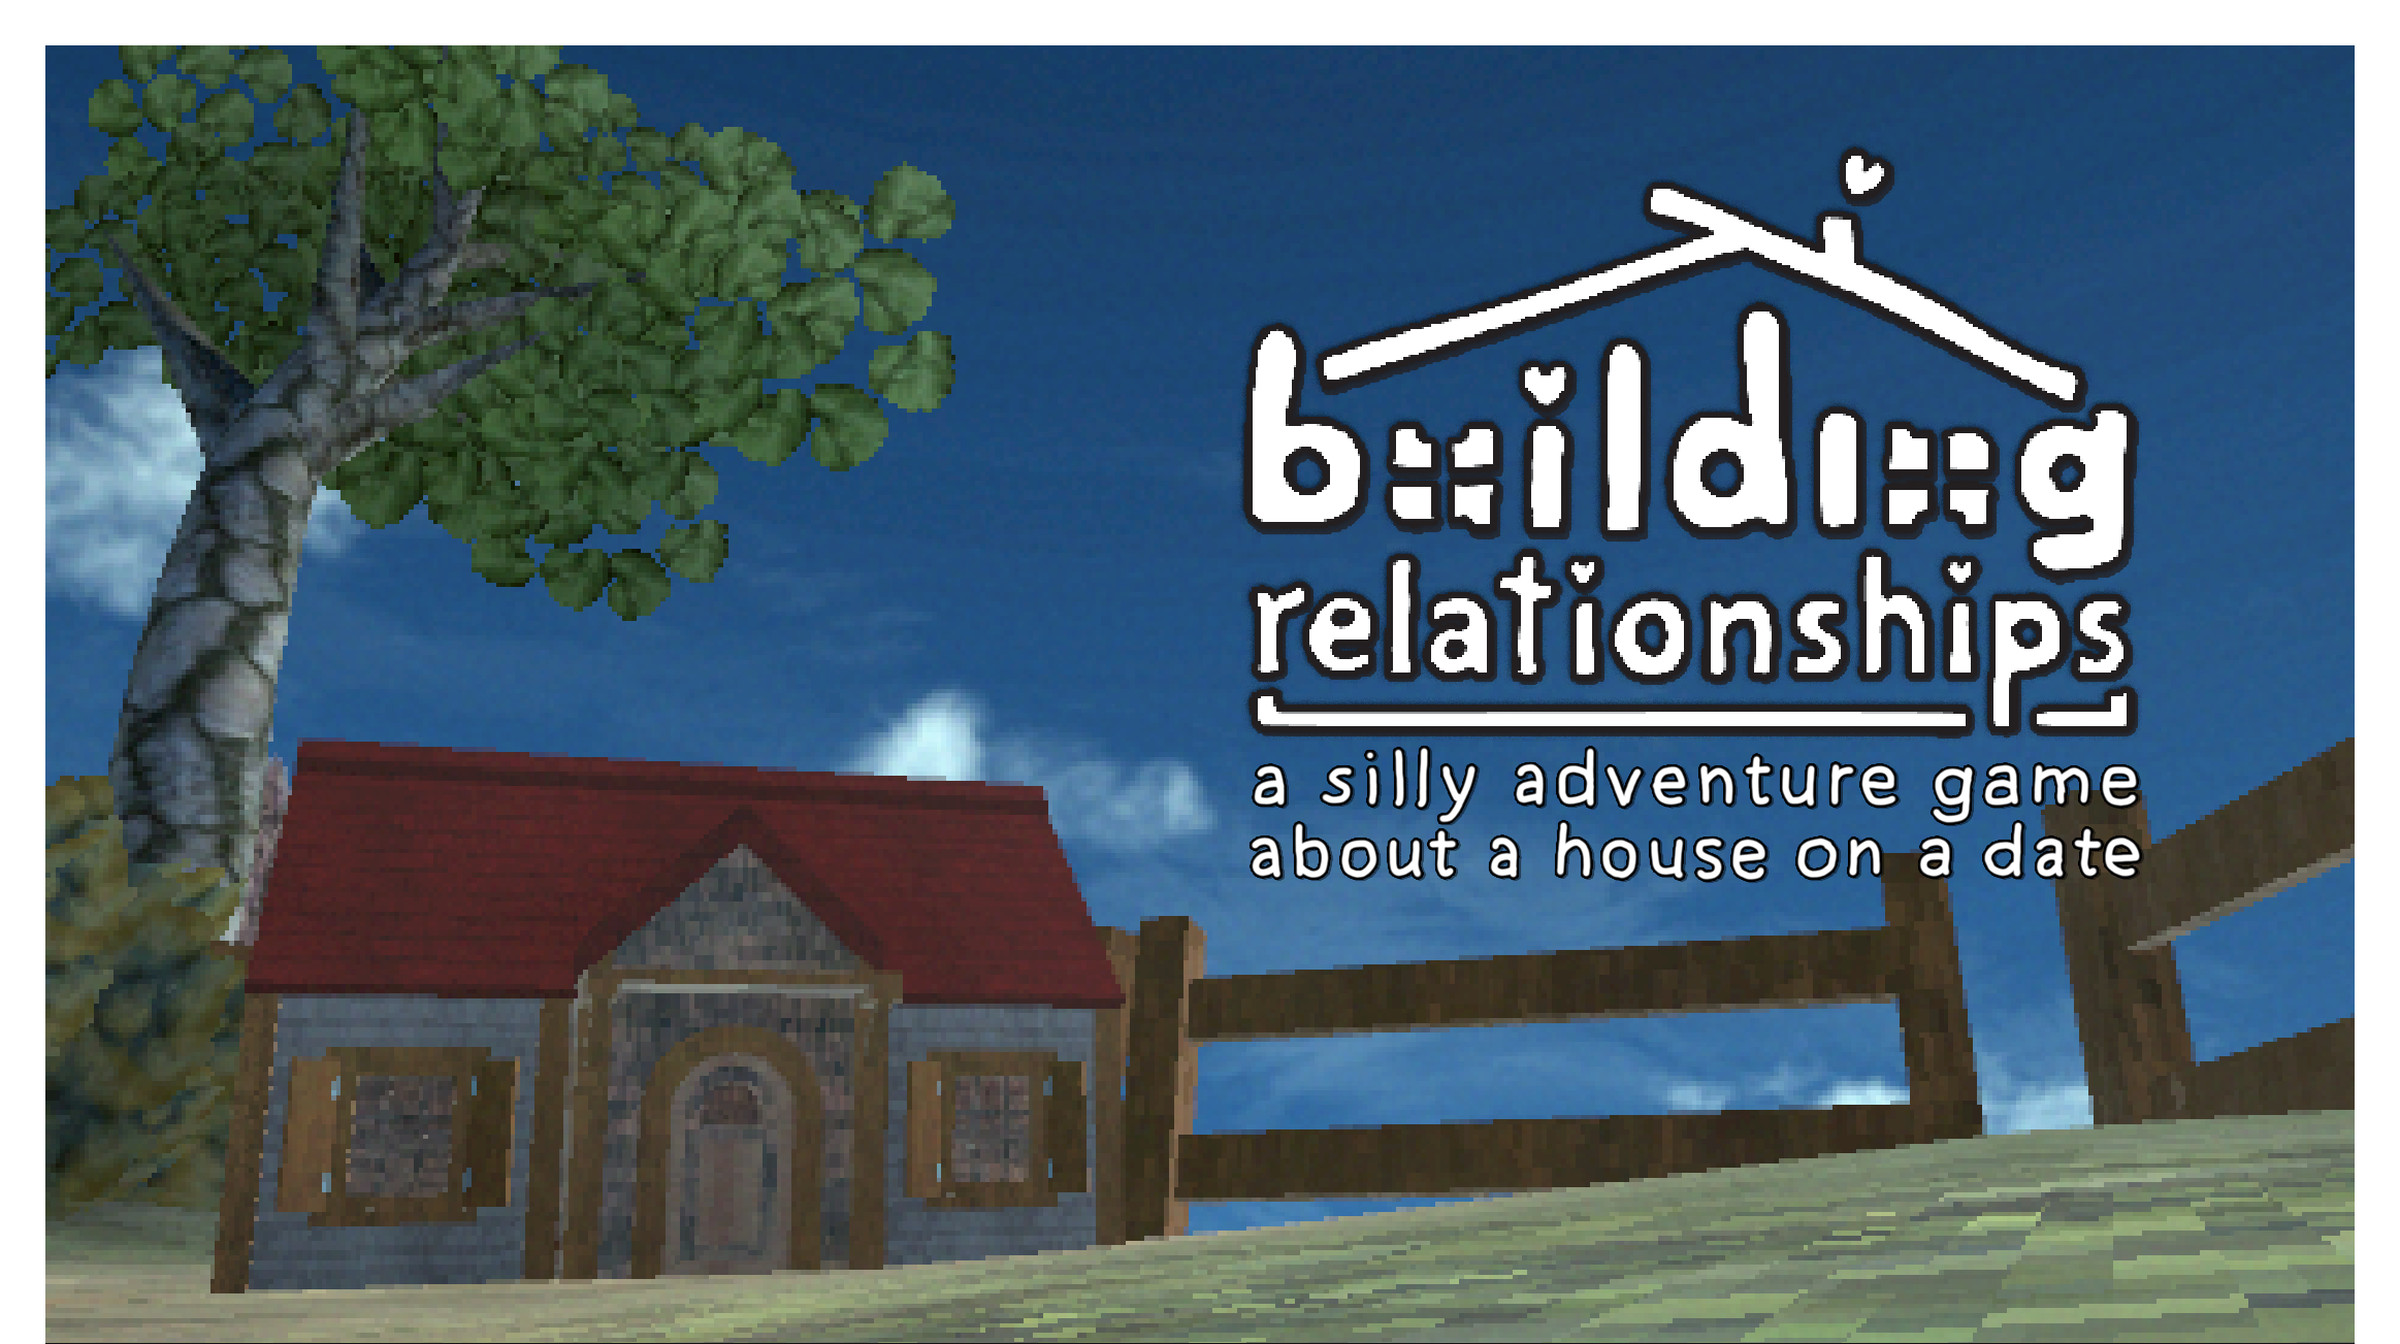 Key art for the video game Building Relationships